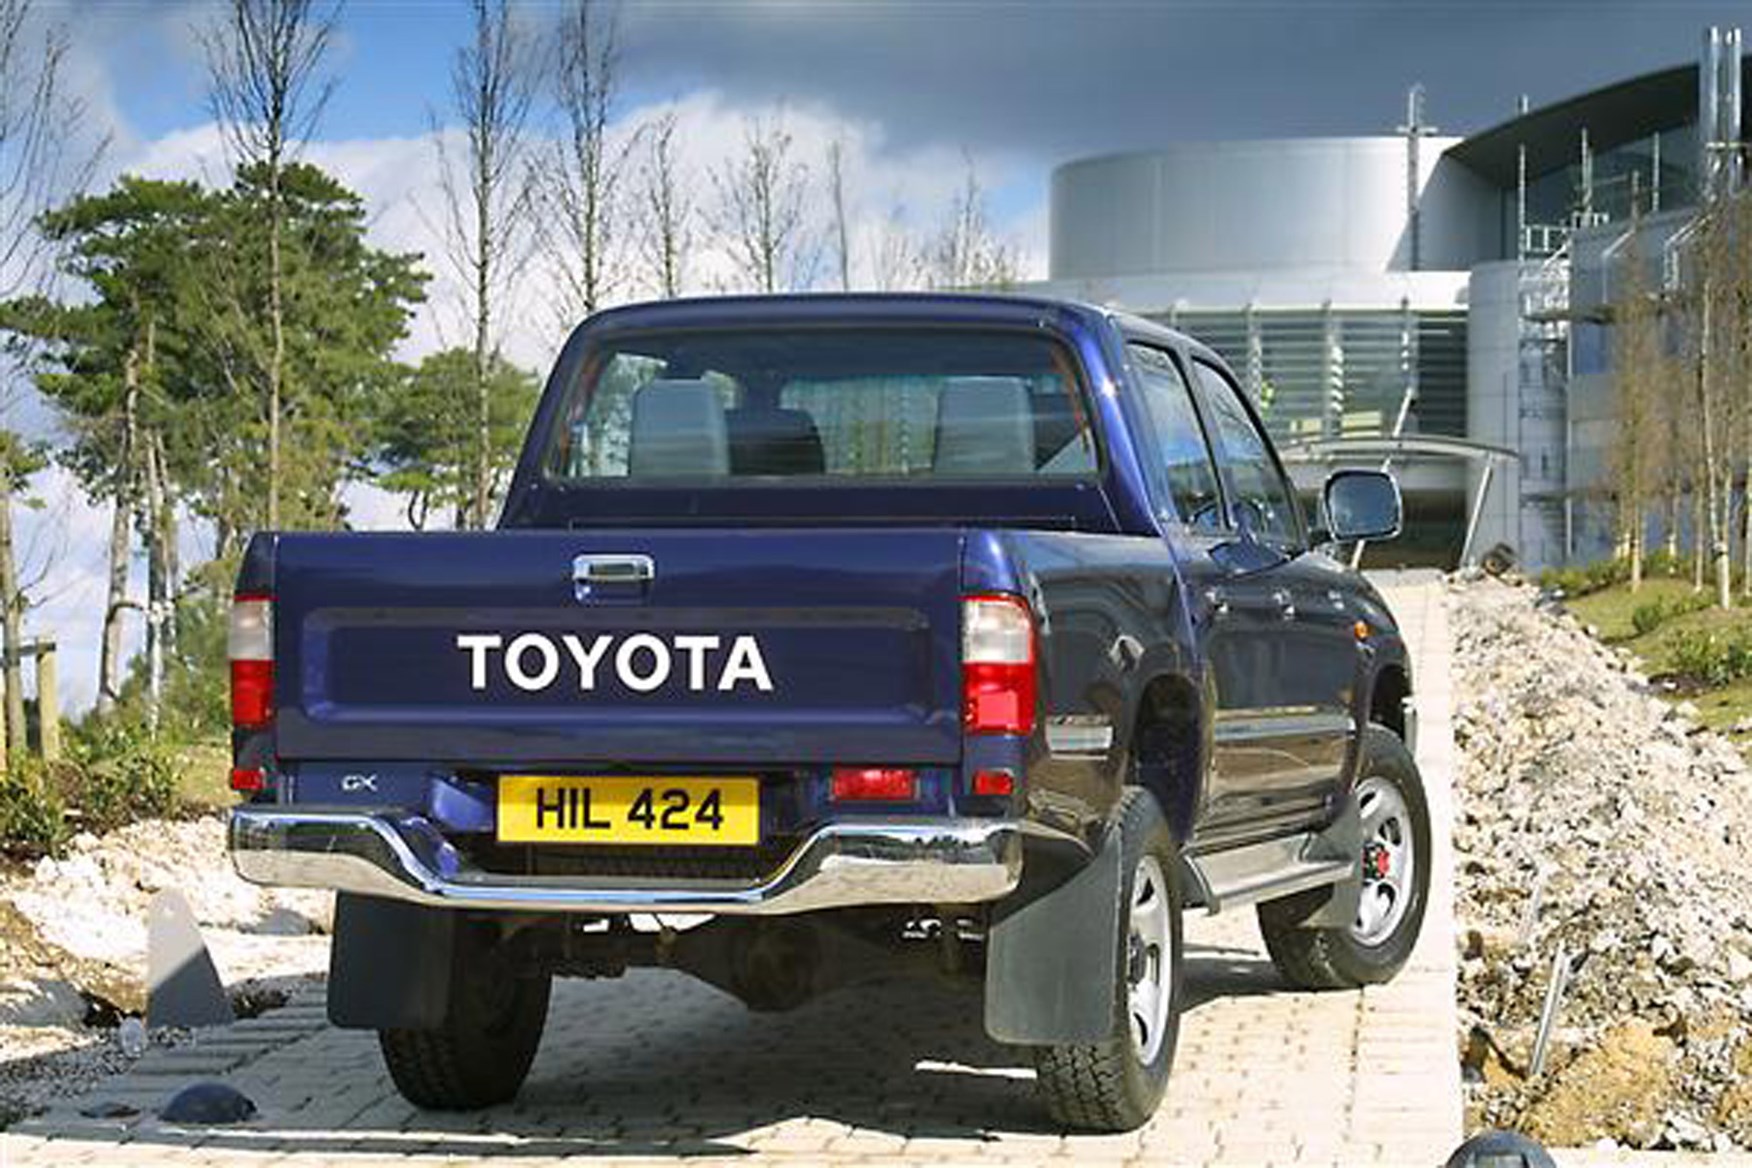 Toyota Hilux review on Parkers Vans - load area